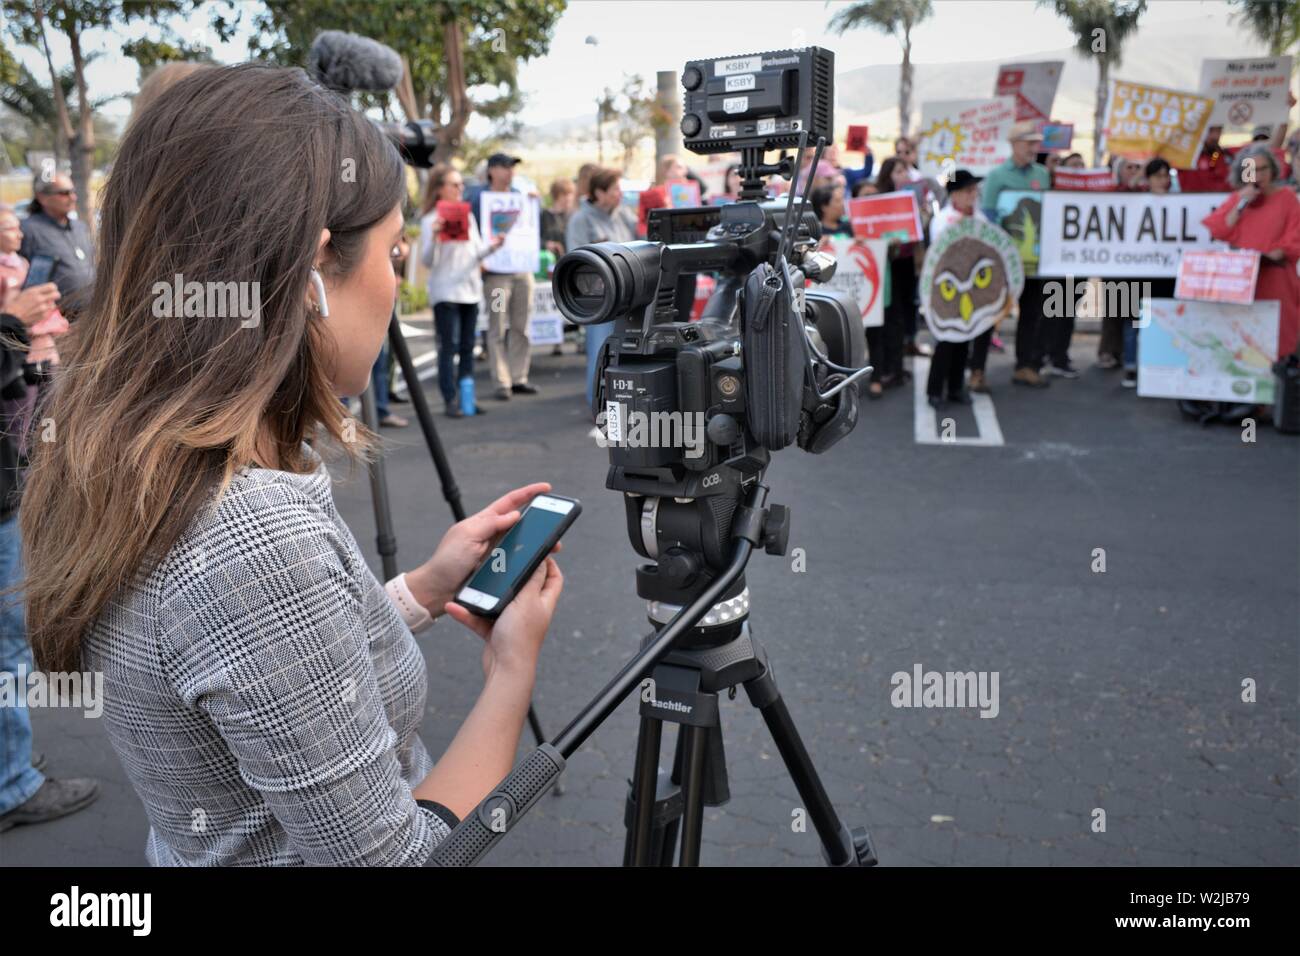 One person news television station coverage of demonstration at public demonstration about environmental fracking by oil companies public land dunes Stock Photo